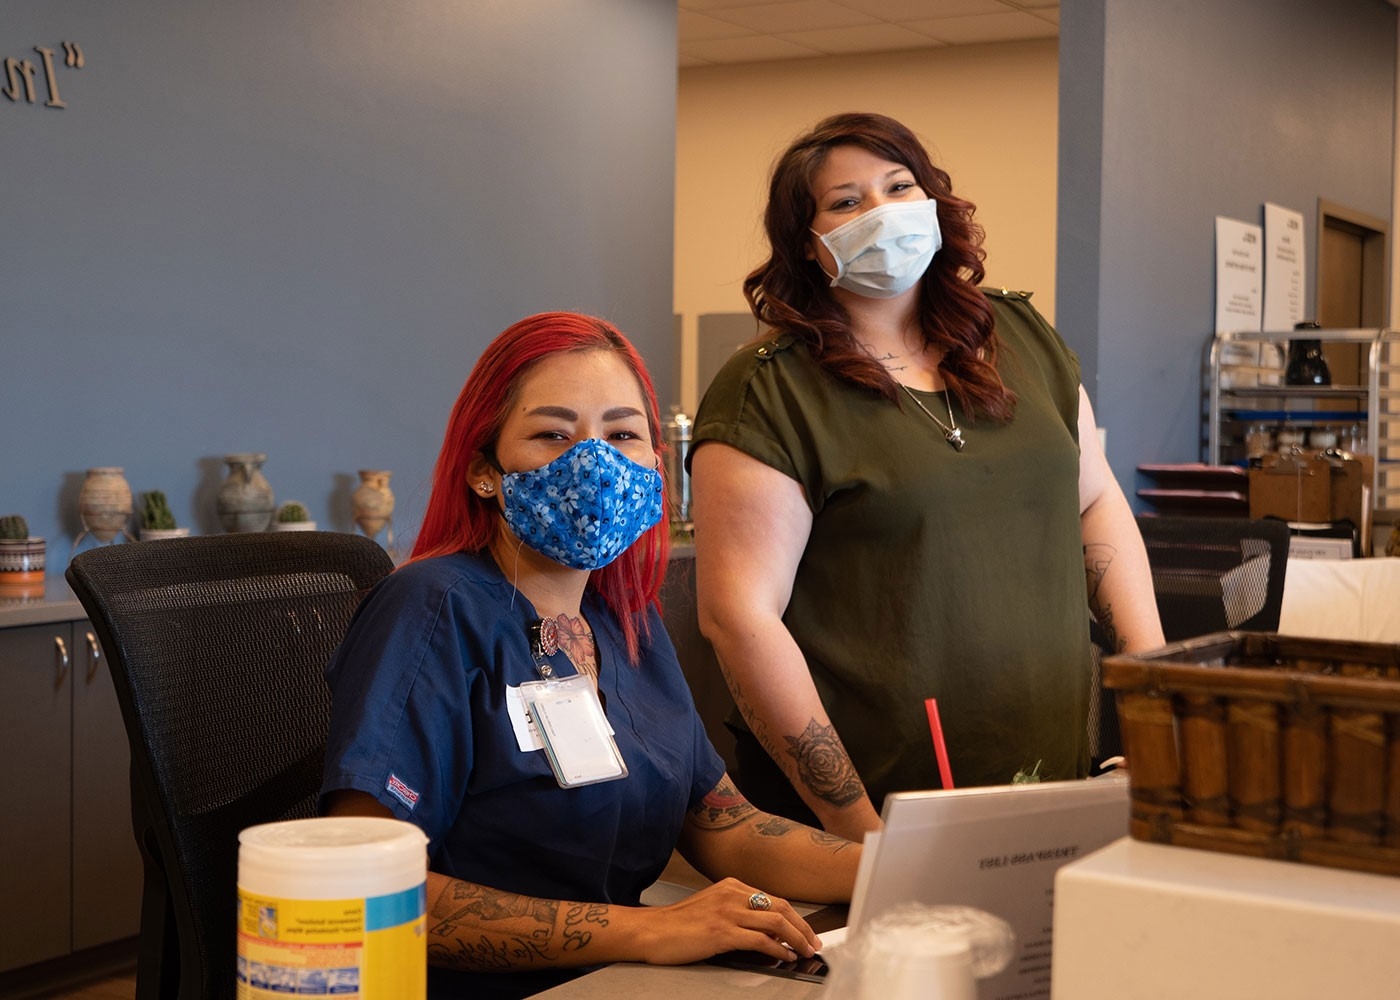 2 people wearing face masks are behind a desk within an office space.